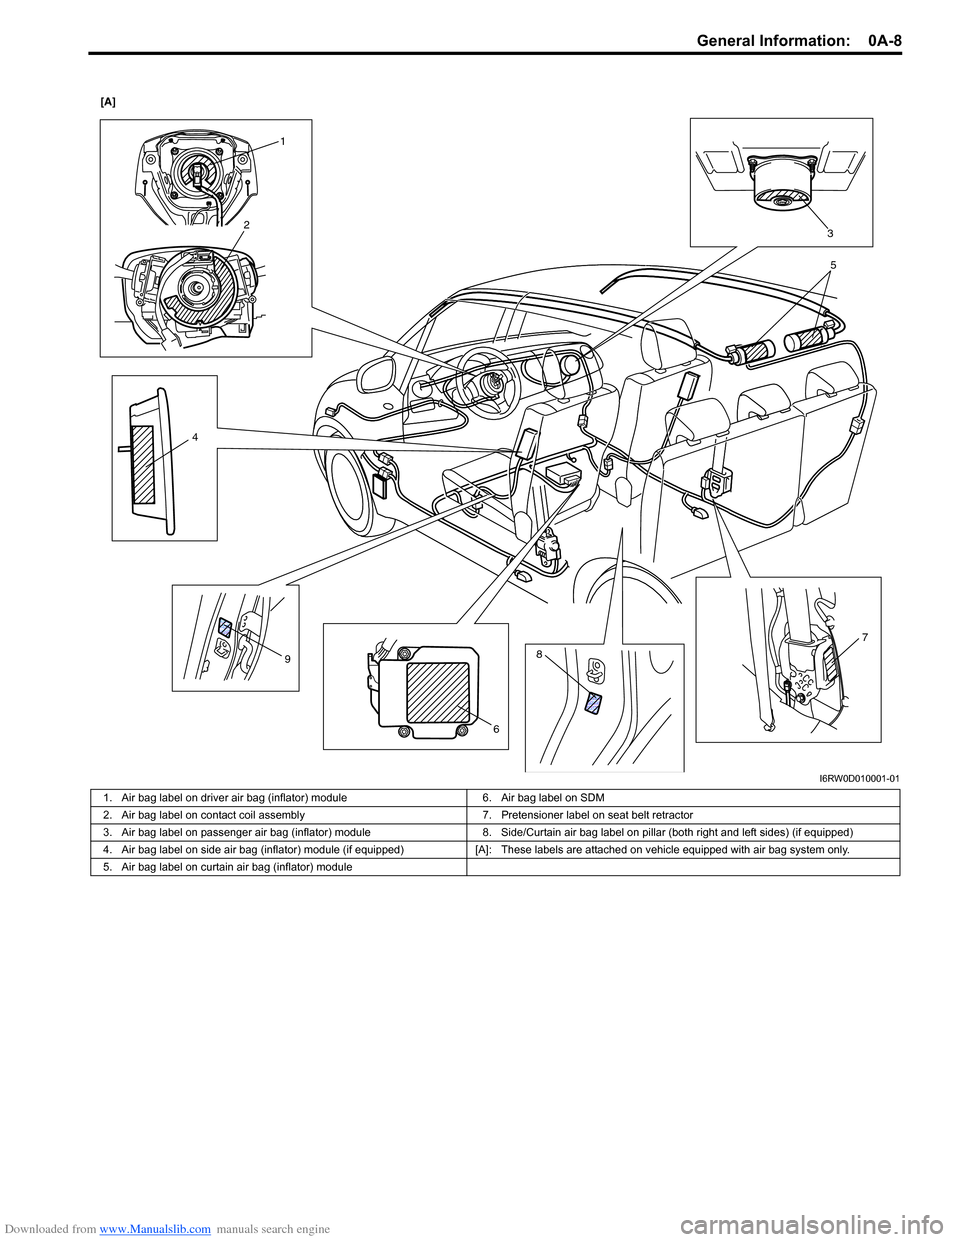 SUZUKI SX4 2006 1.G Service Workshop Manual Downloaded from www.Manualslib.com manuals search engine General Information:  0A-8
1
2
4
8
6 97 3 [A]
5
I6RW0D010001-01
1. Air bag label on driver air bag (inflator) module 6. Air bag label on SDM
2.